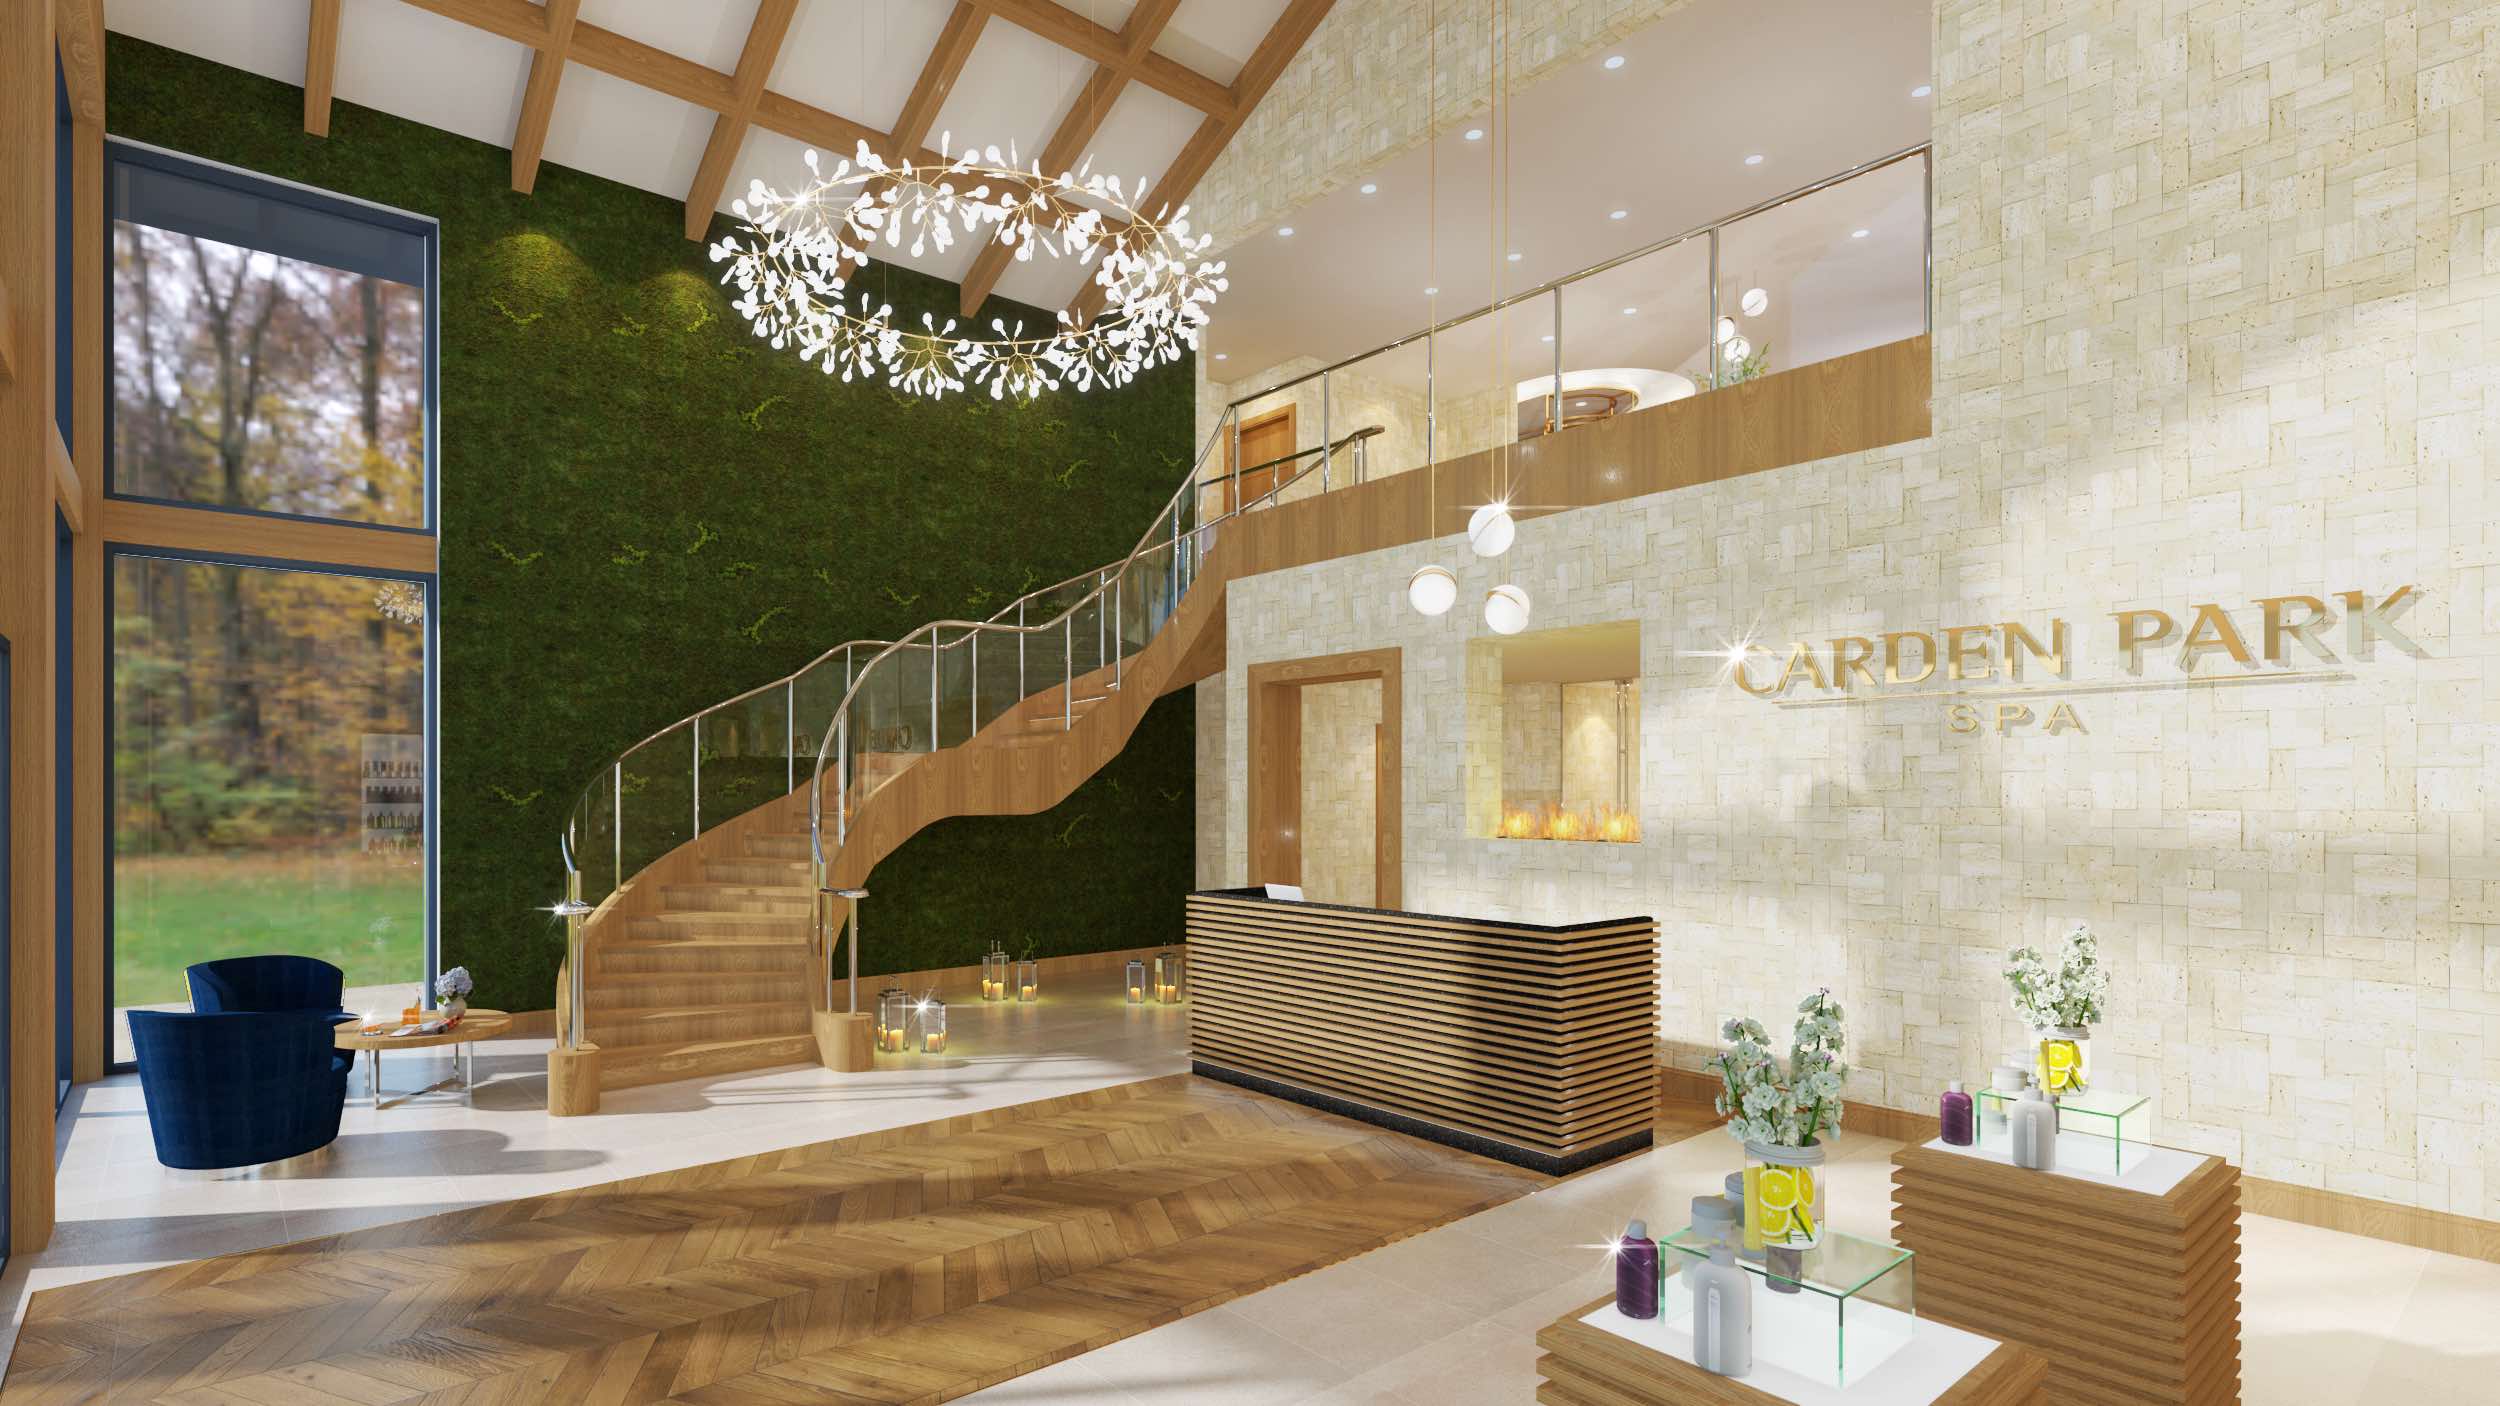 The Spa at Carden reception area